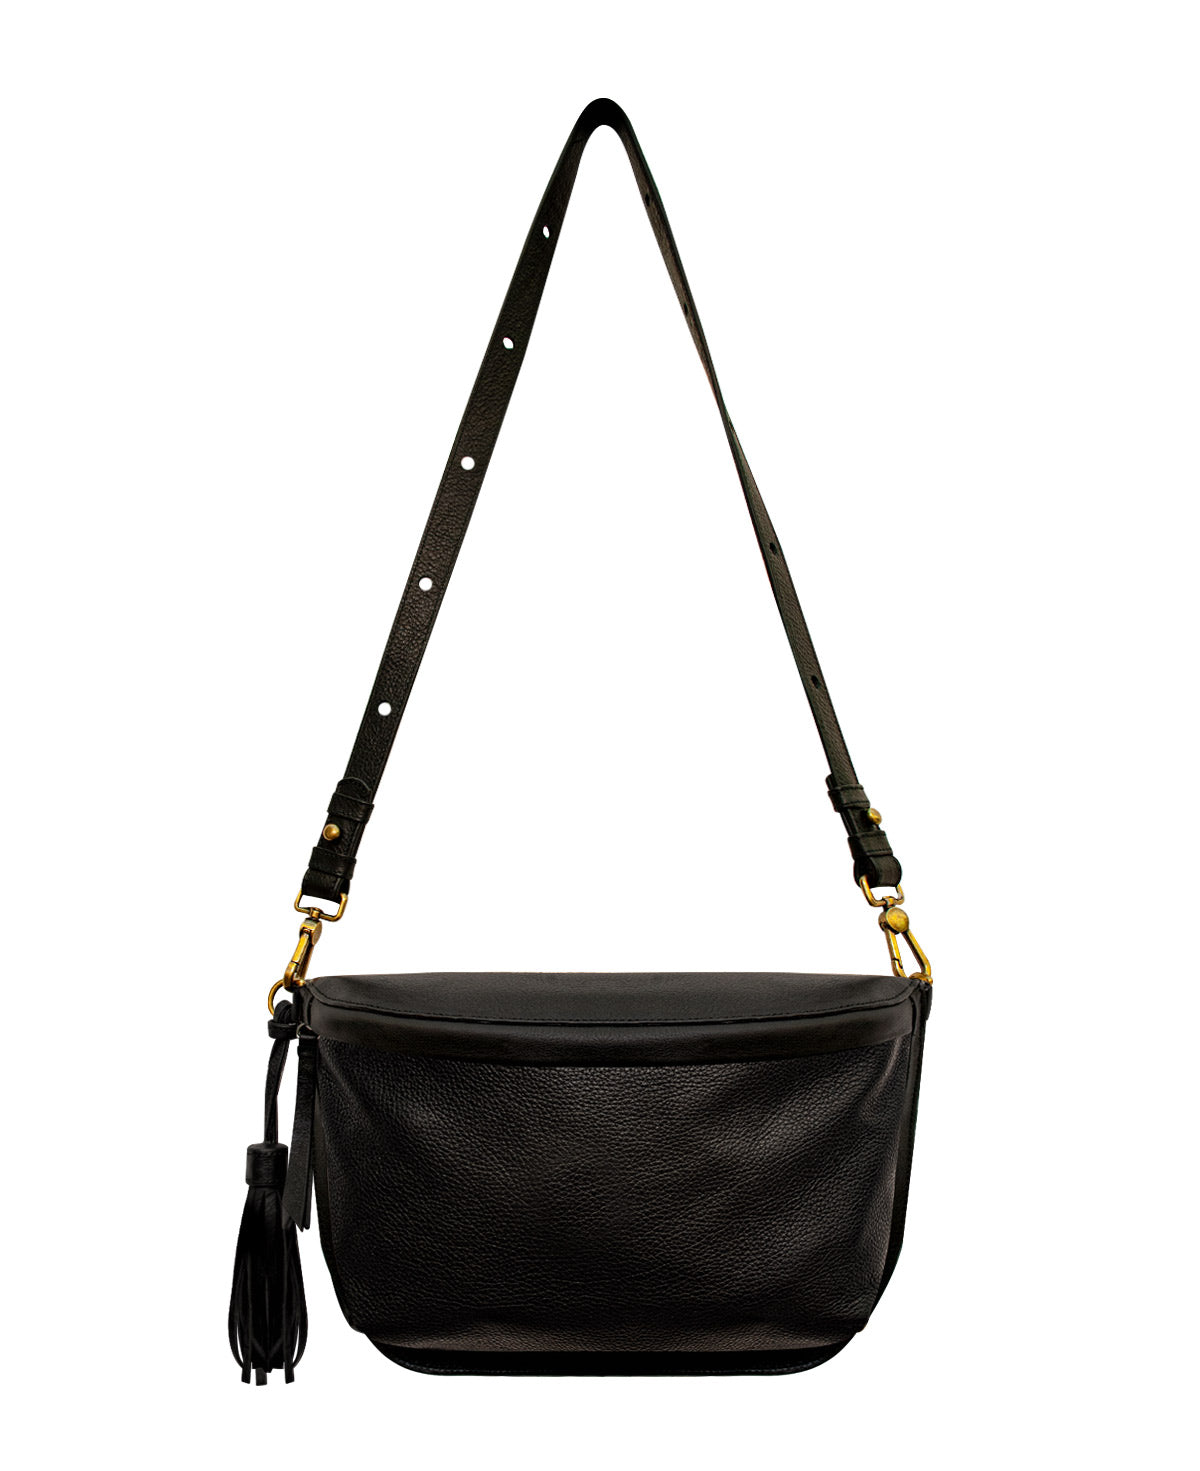 All Black Leather Fanny Pack for Women CHER Leather Sling Bag